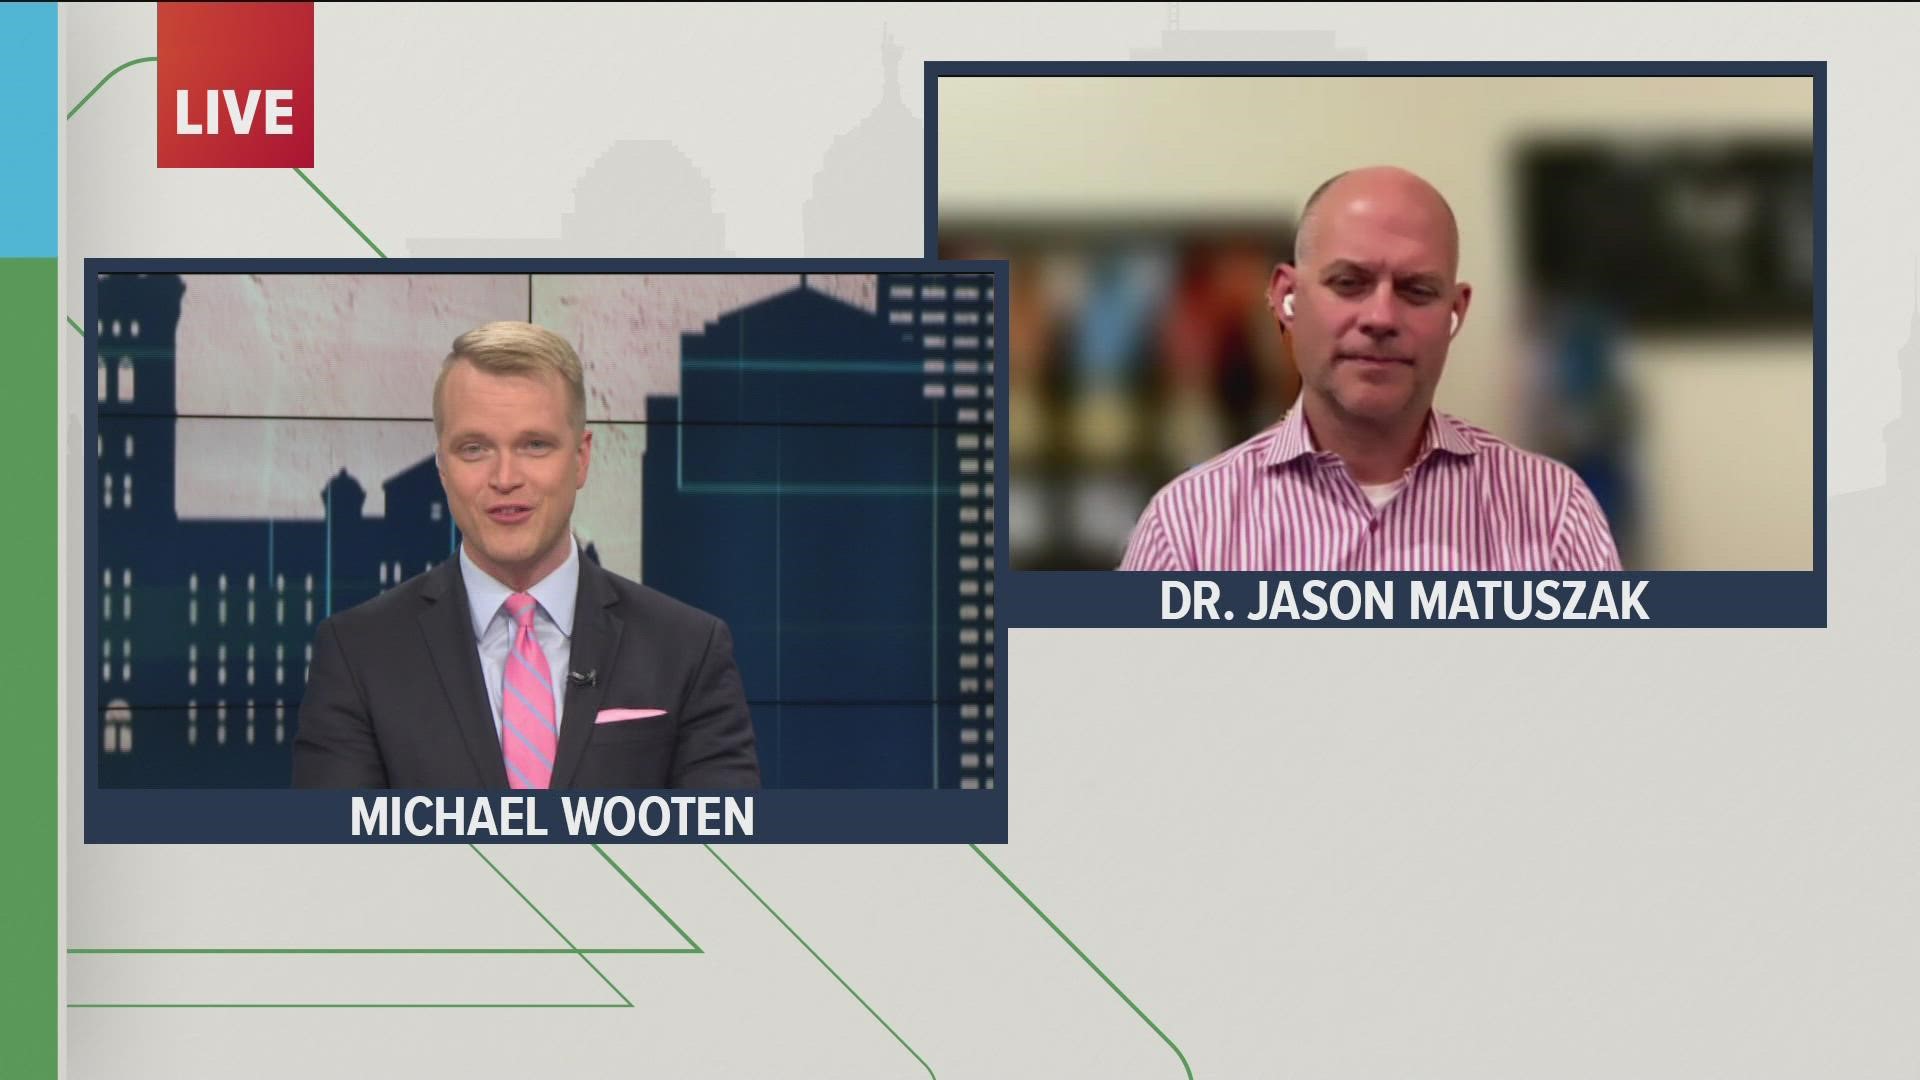 Dr. Jason Matuszak, a sports medicine physician with Excelsior Orthopedics, discussed the injury that ended Von Miller's season for the Buffalo Bills.